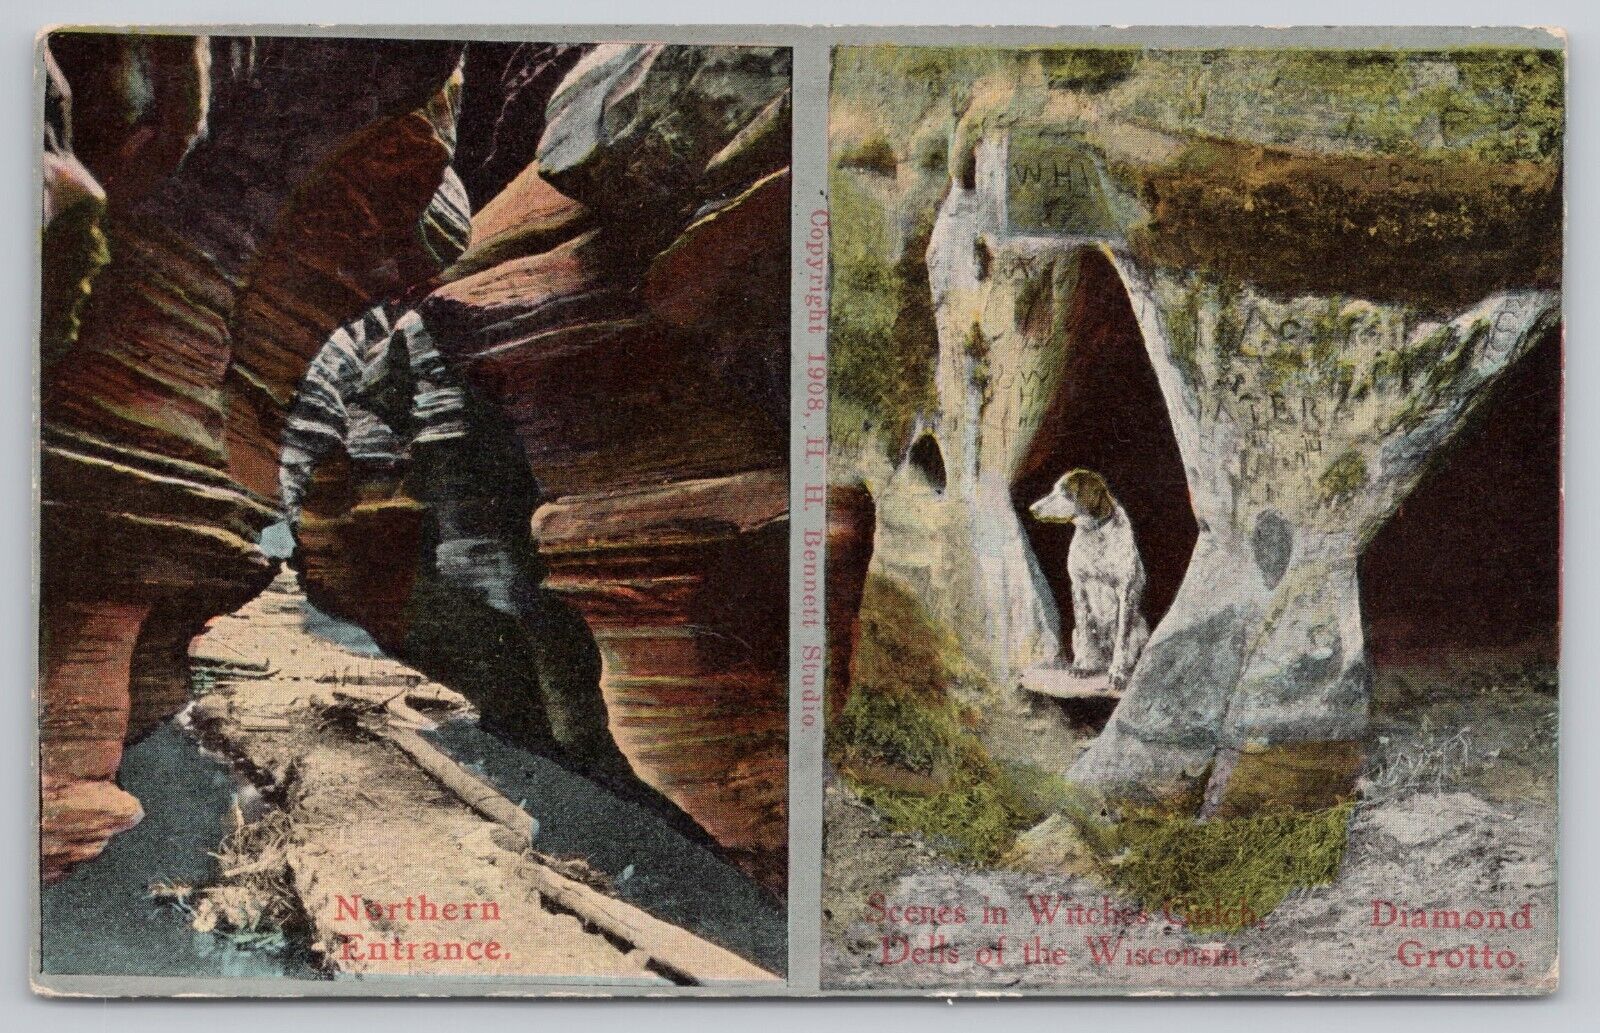 Postcard Scenes in Witches Gulch Dells of Wisconsin Diamond Grotto & N Entrance